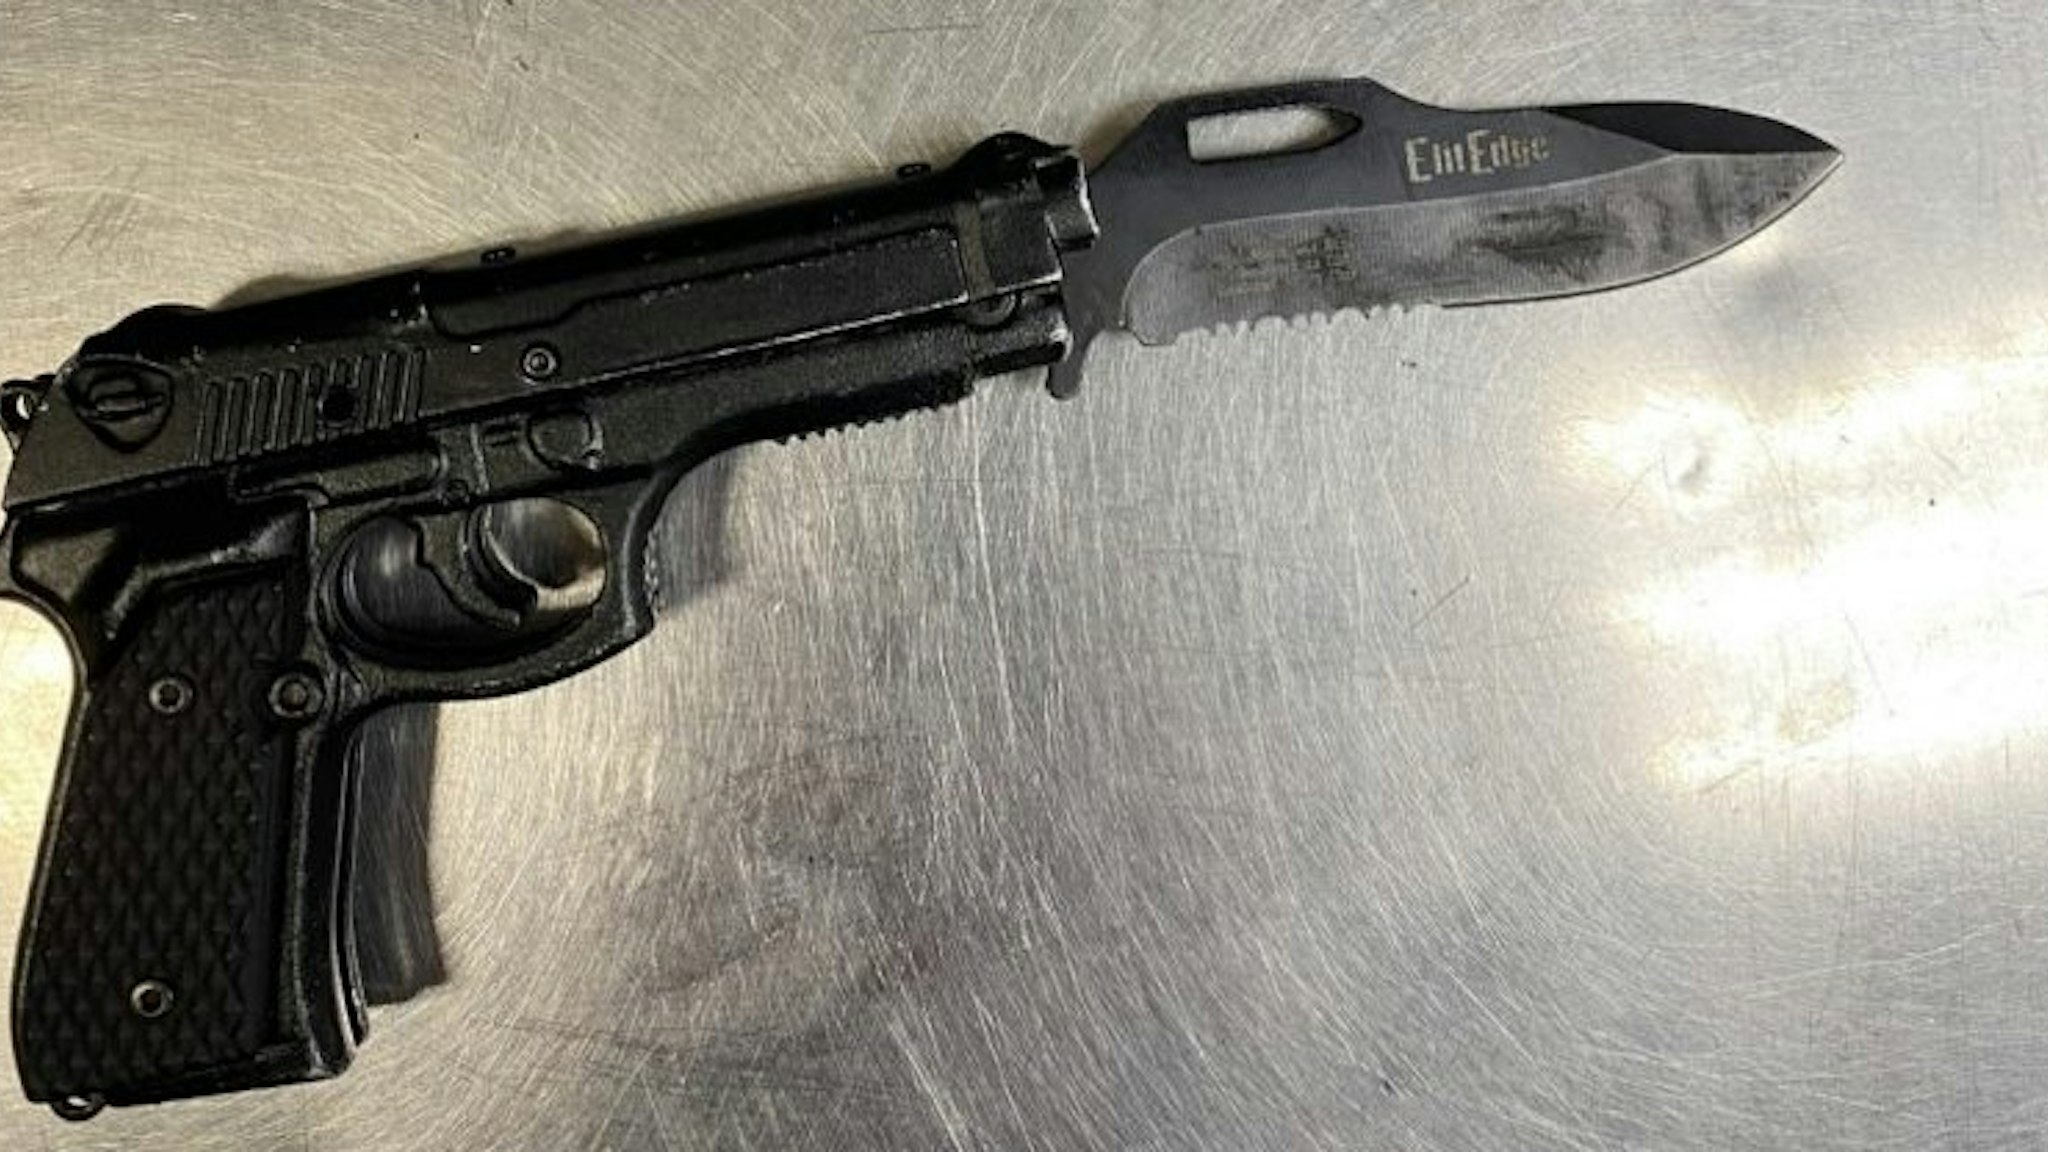 Here's The Knife-Gun Alleged Isiah Lee Allegedly Used To Attack Comedian Dave Chappelle